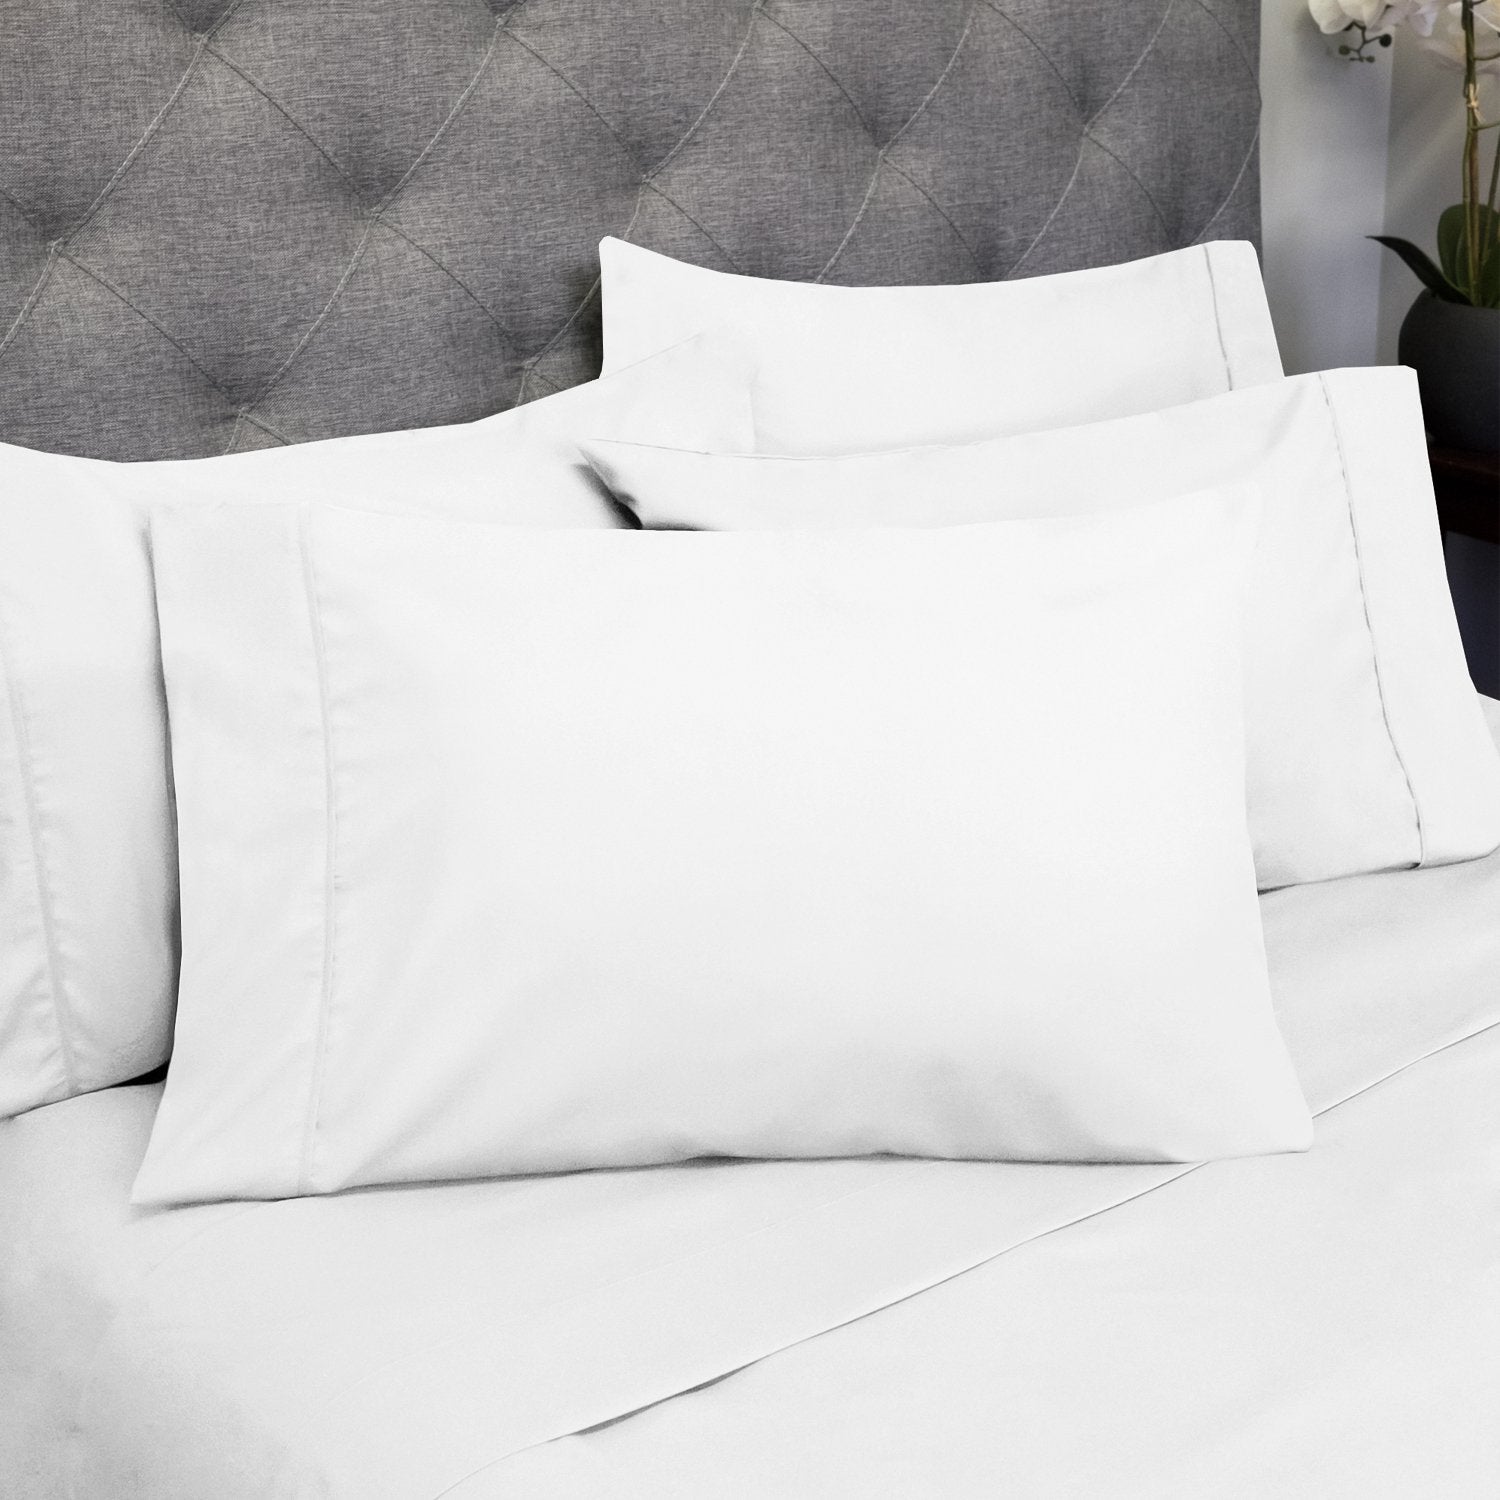 Deluxe 6-Piece Bed Sheet Set (White) - Pillowcases